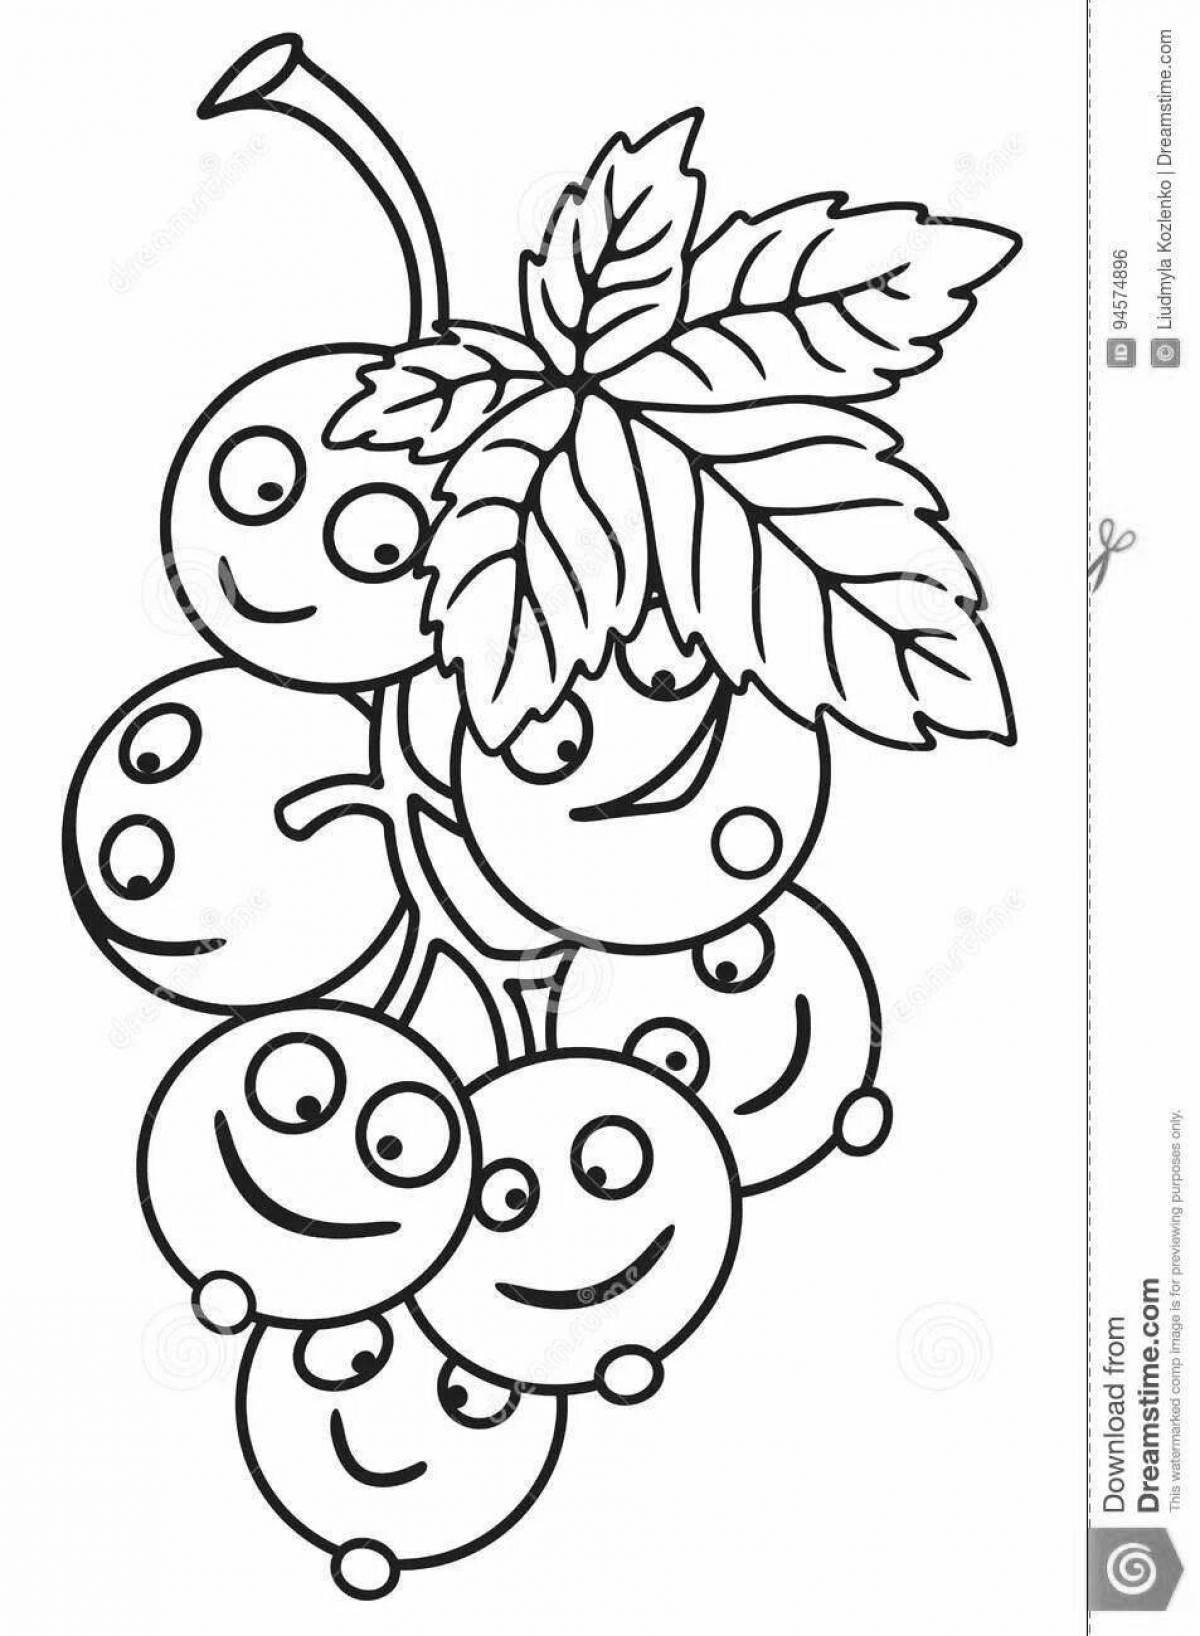 Cute currant coloring book for kids